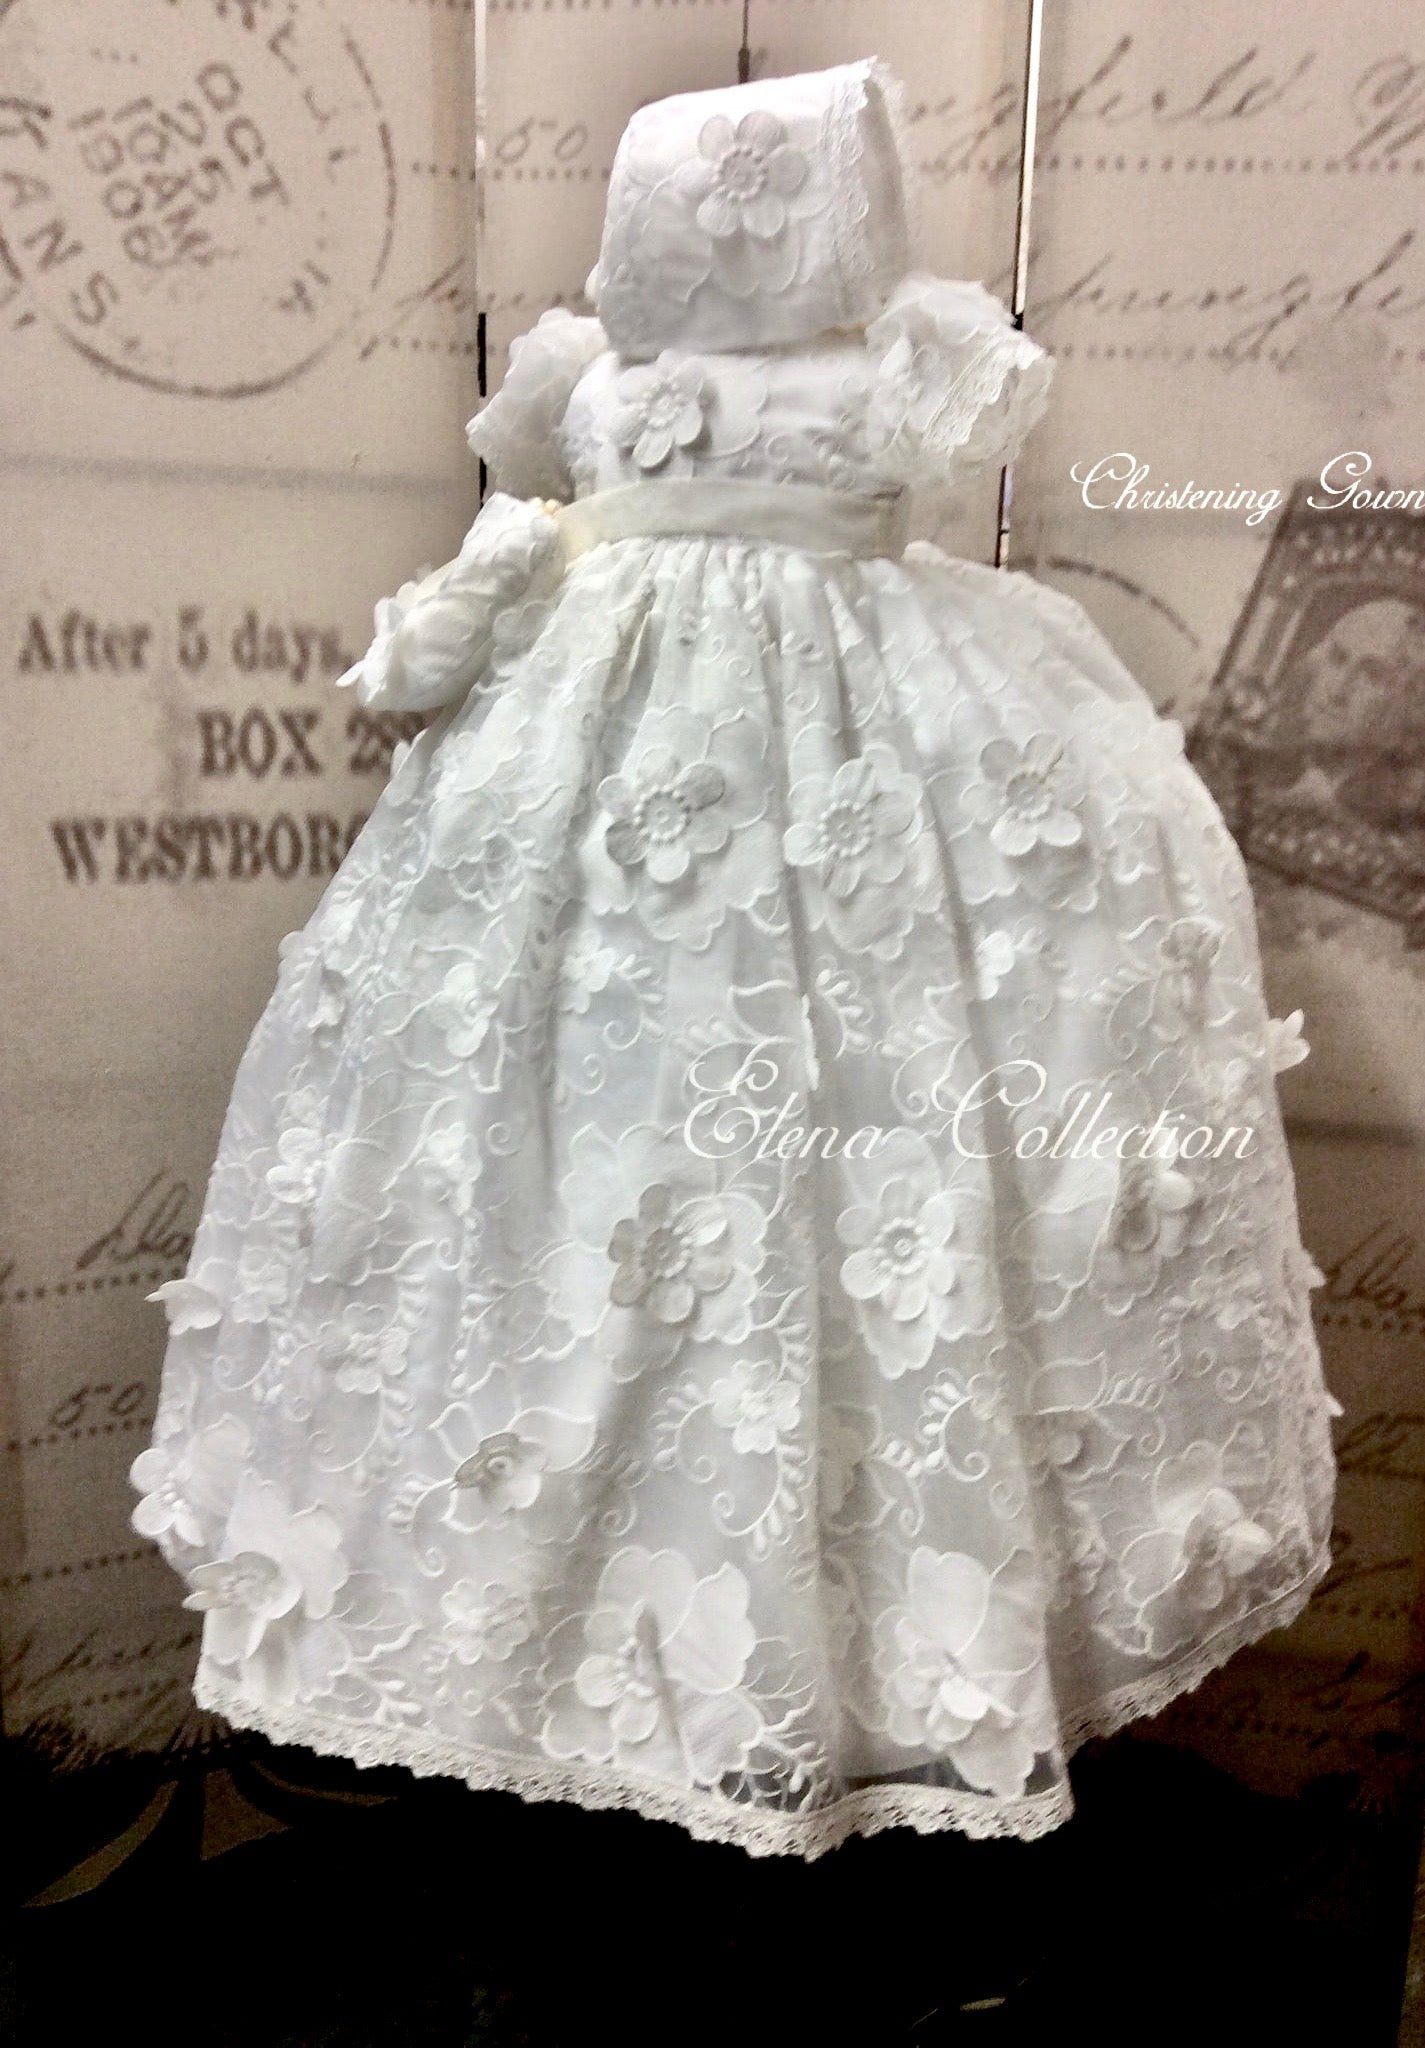 Christening Gown with Bonnet - Charlotte